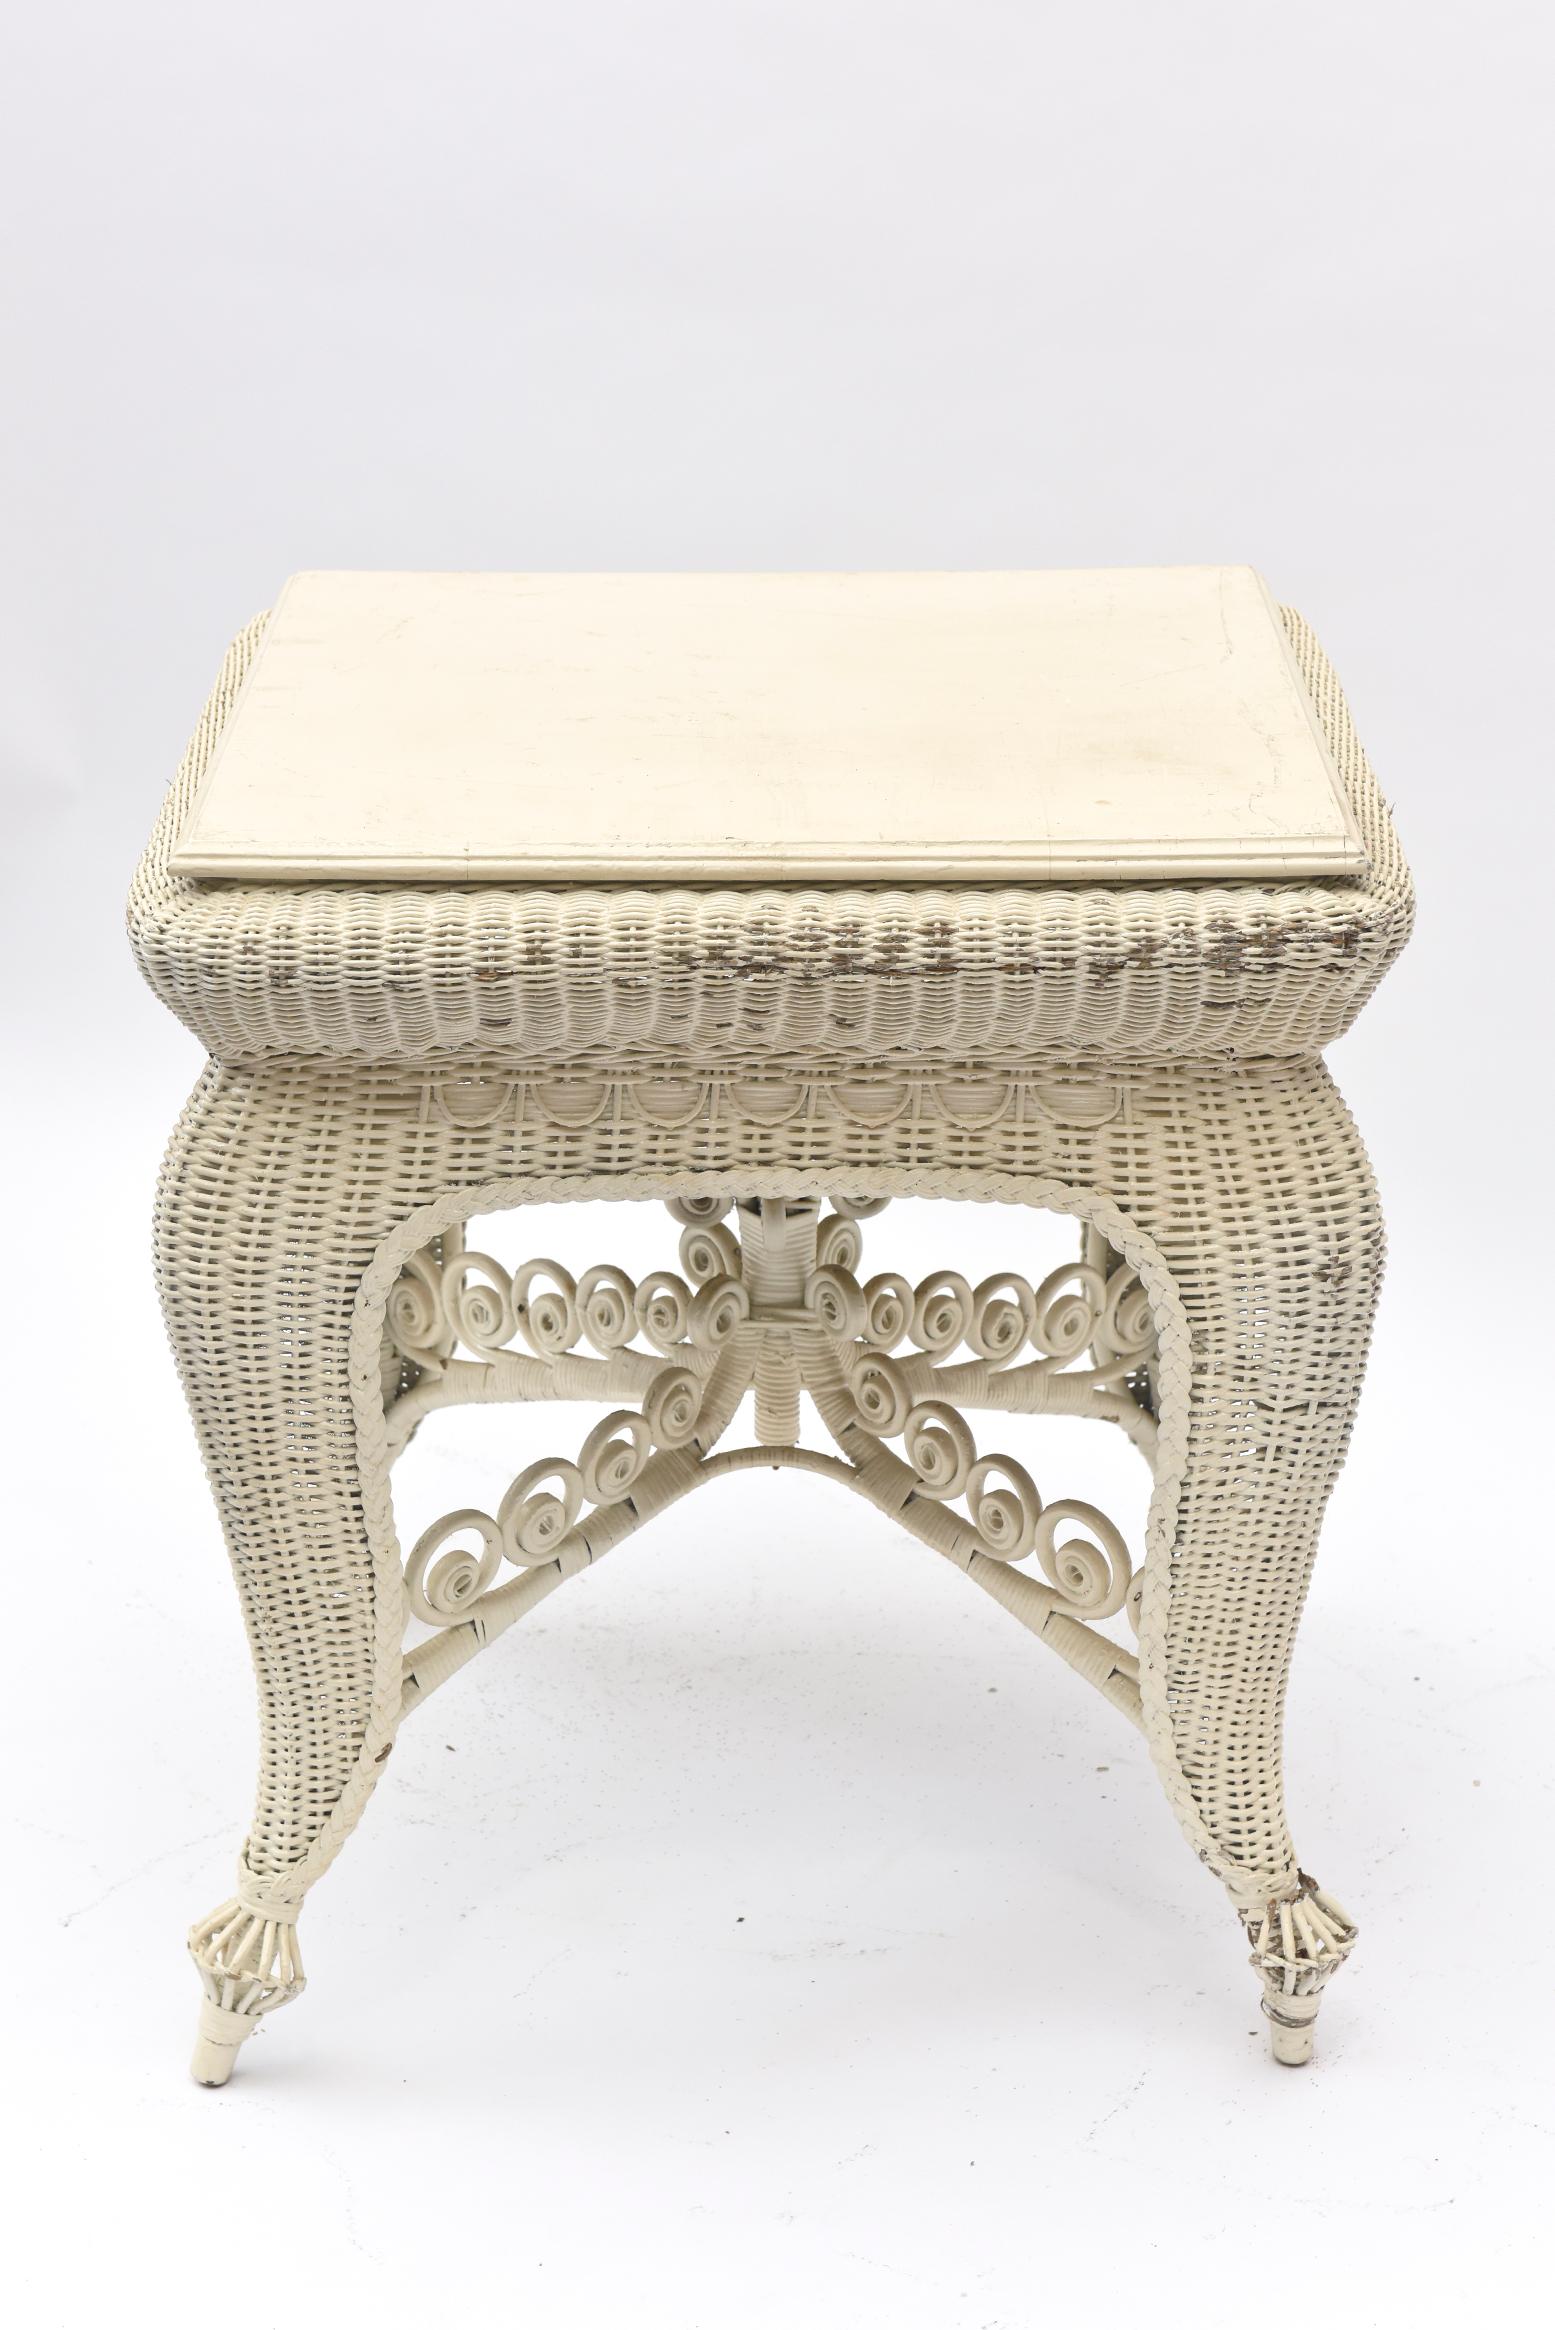 This lovely square table is tightly woven and has beautifully curved legs and a crisscrossed curlicue base. At the base of the legs is a 